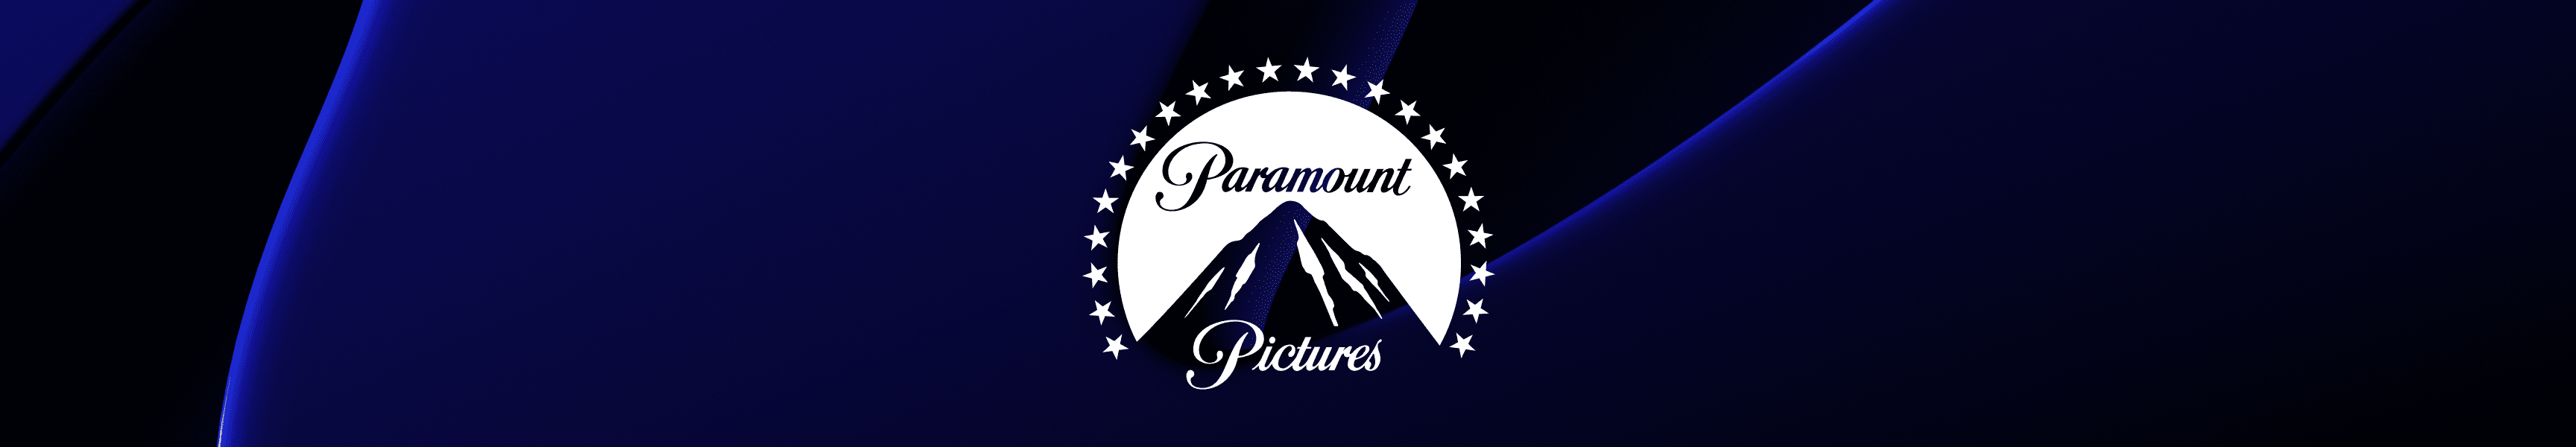 Paramount Pictures Water Bottles